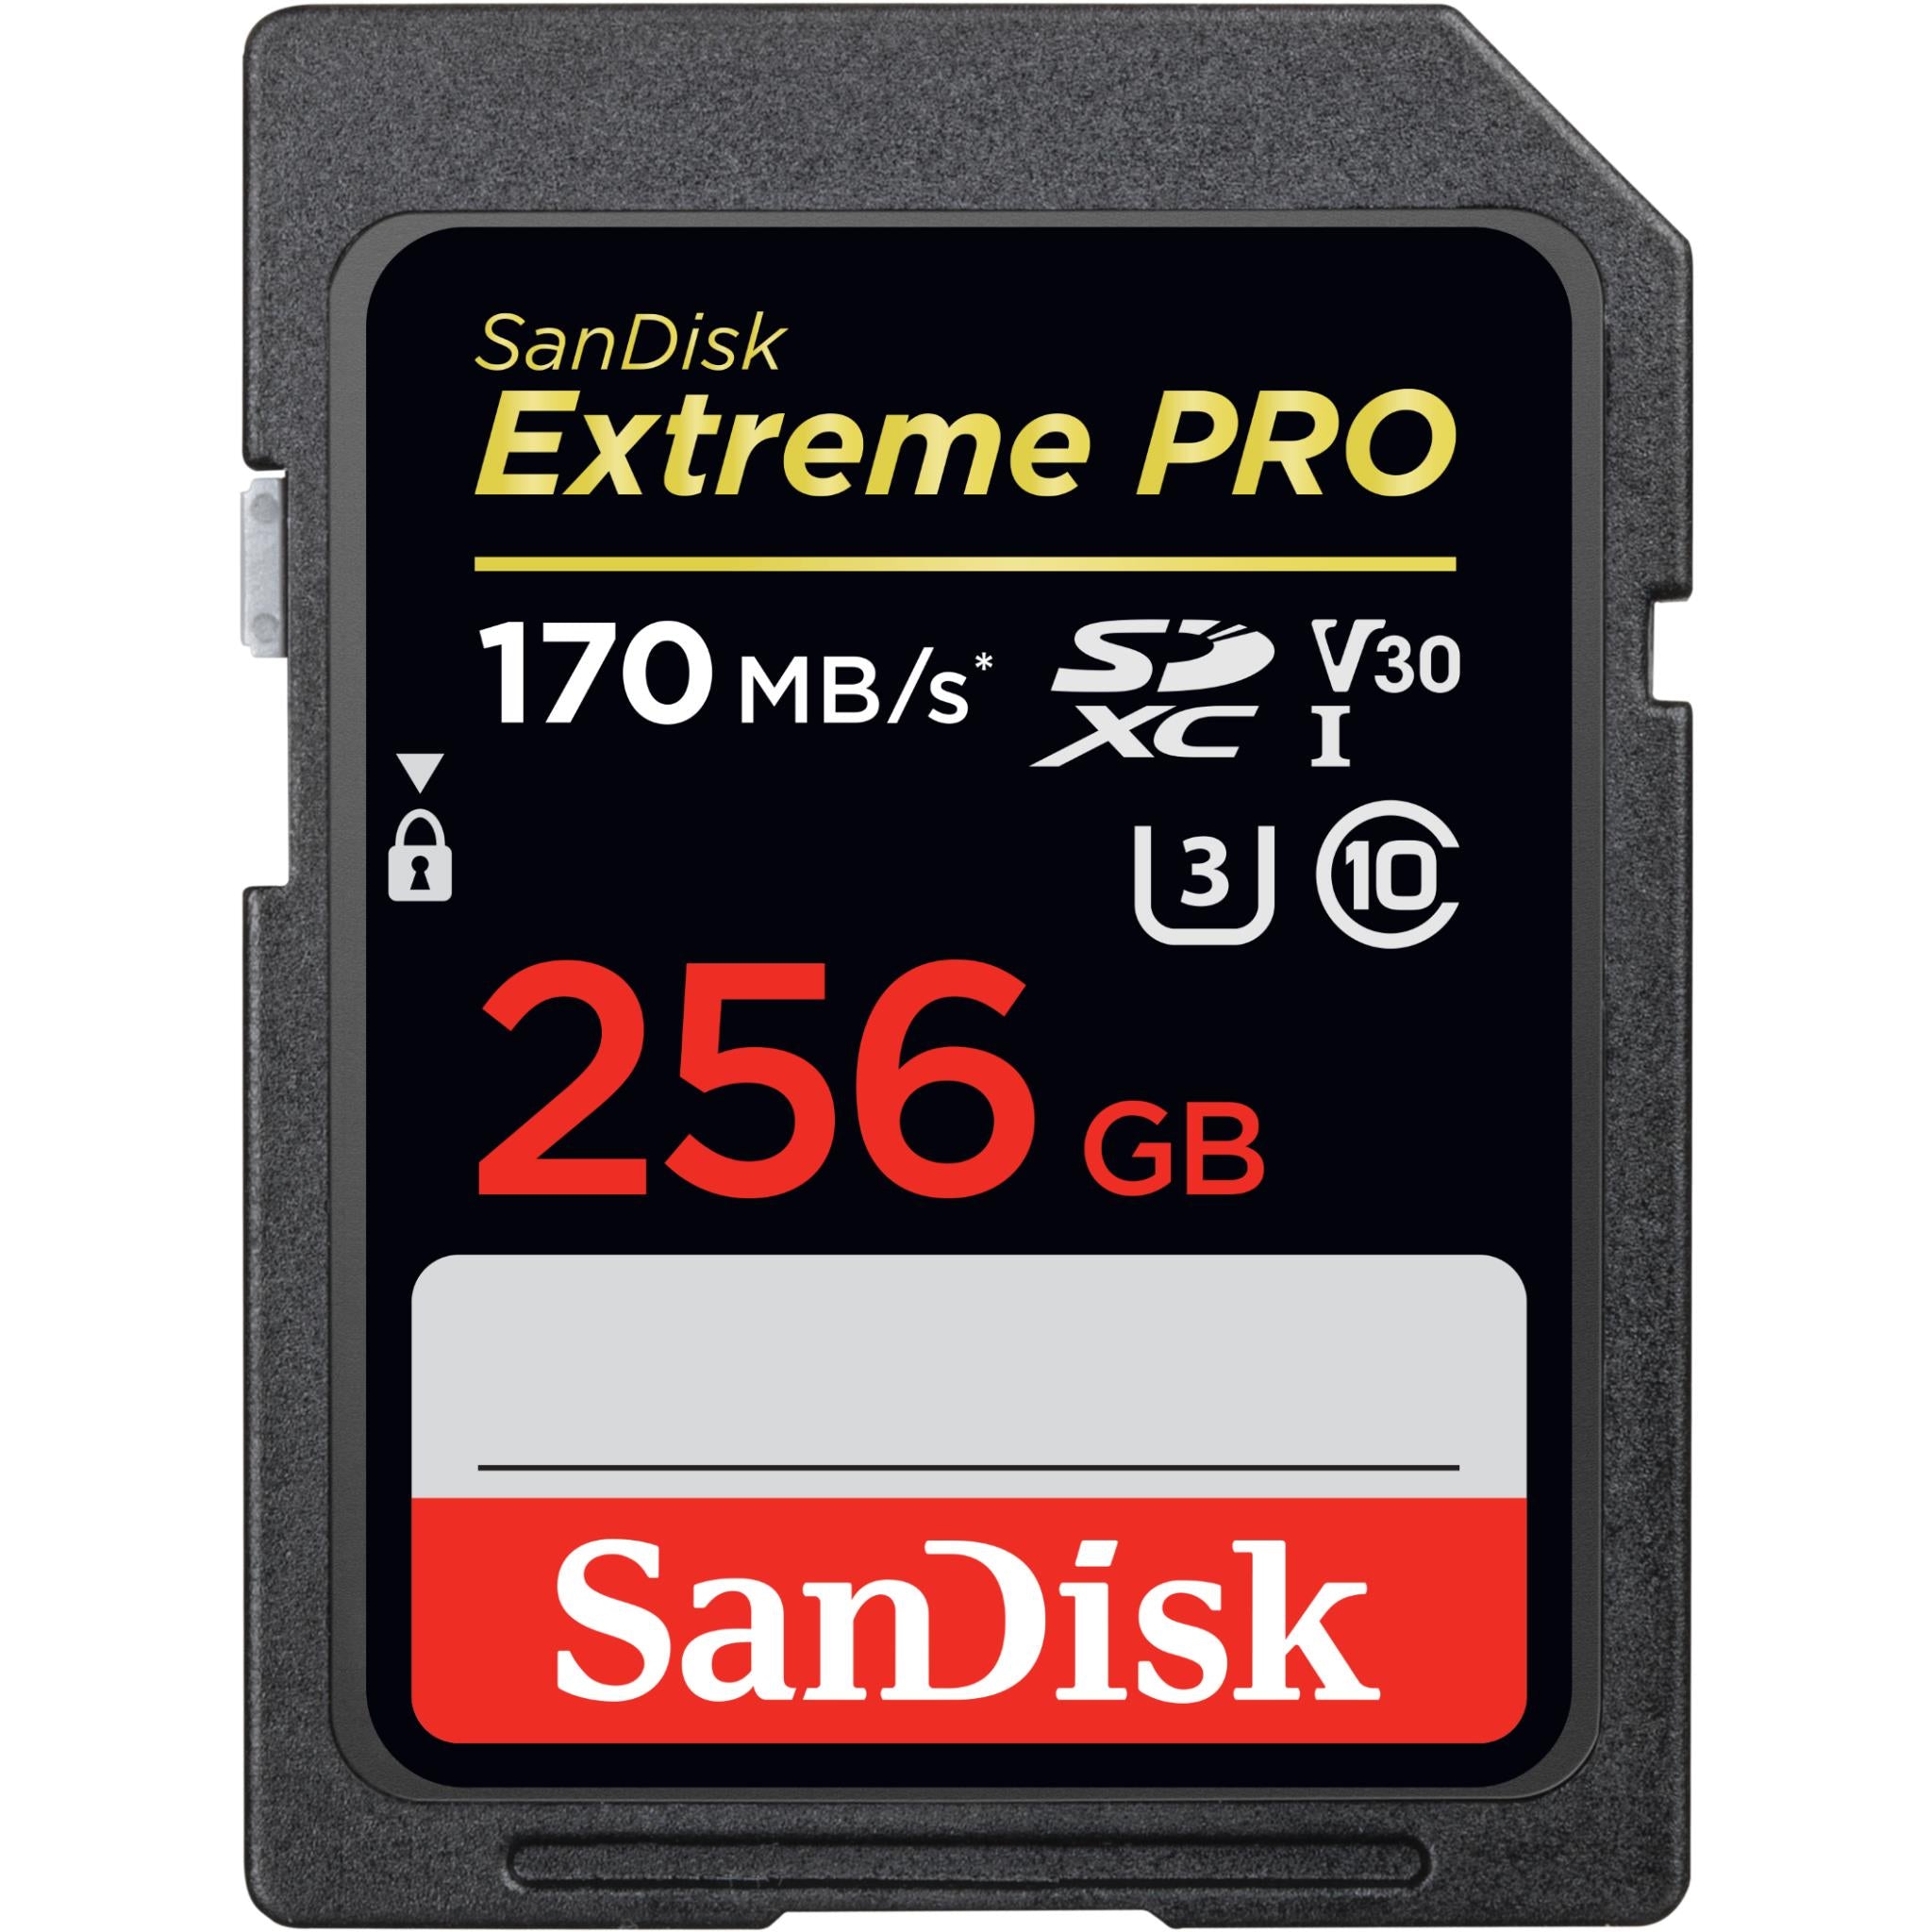 sandisk extreme pro sdxc 256gb 170mb/s memory card